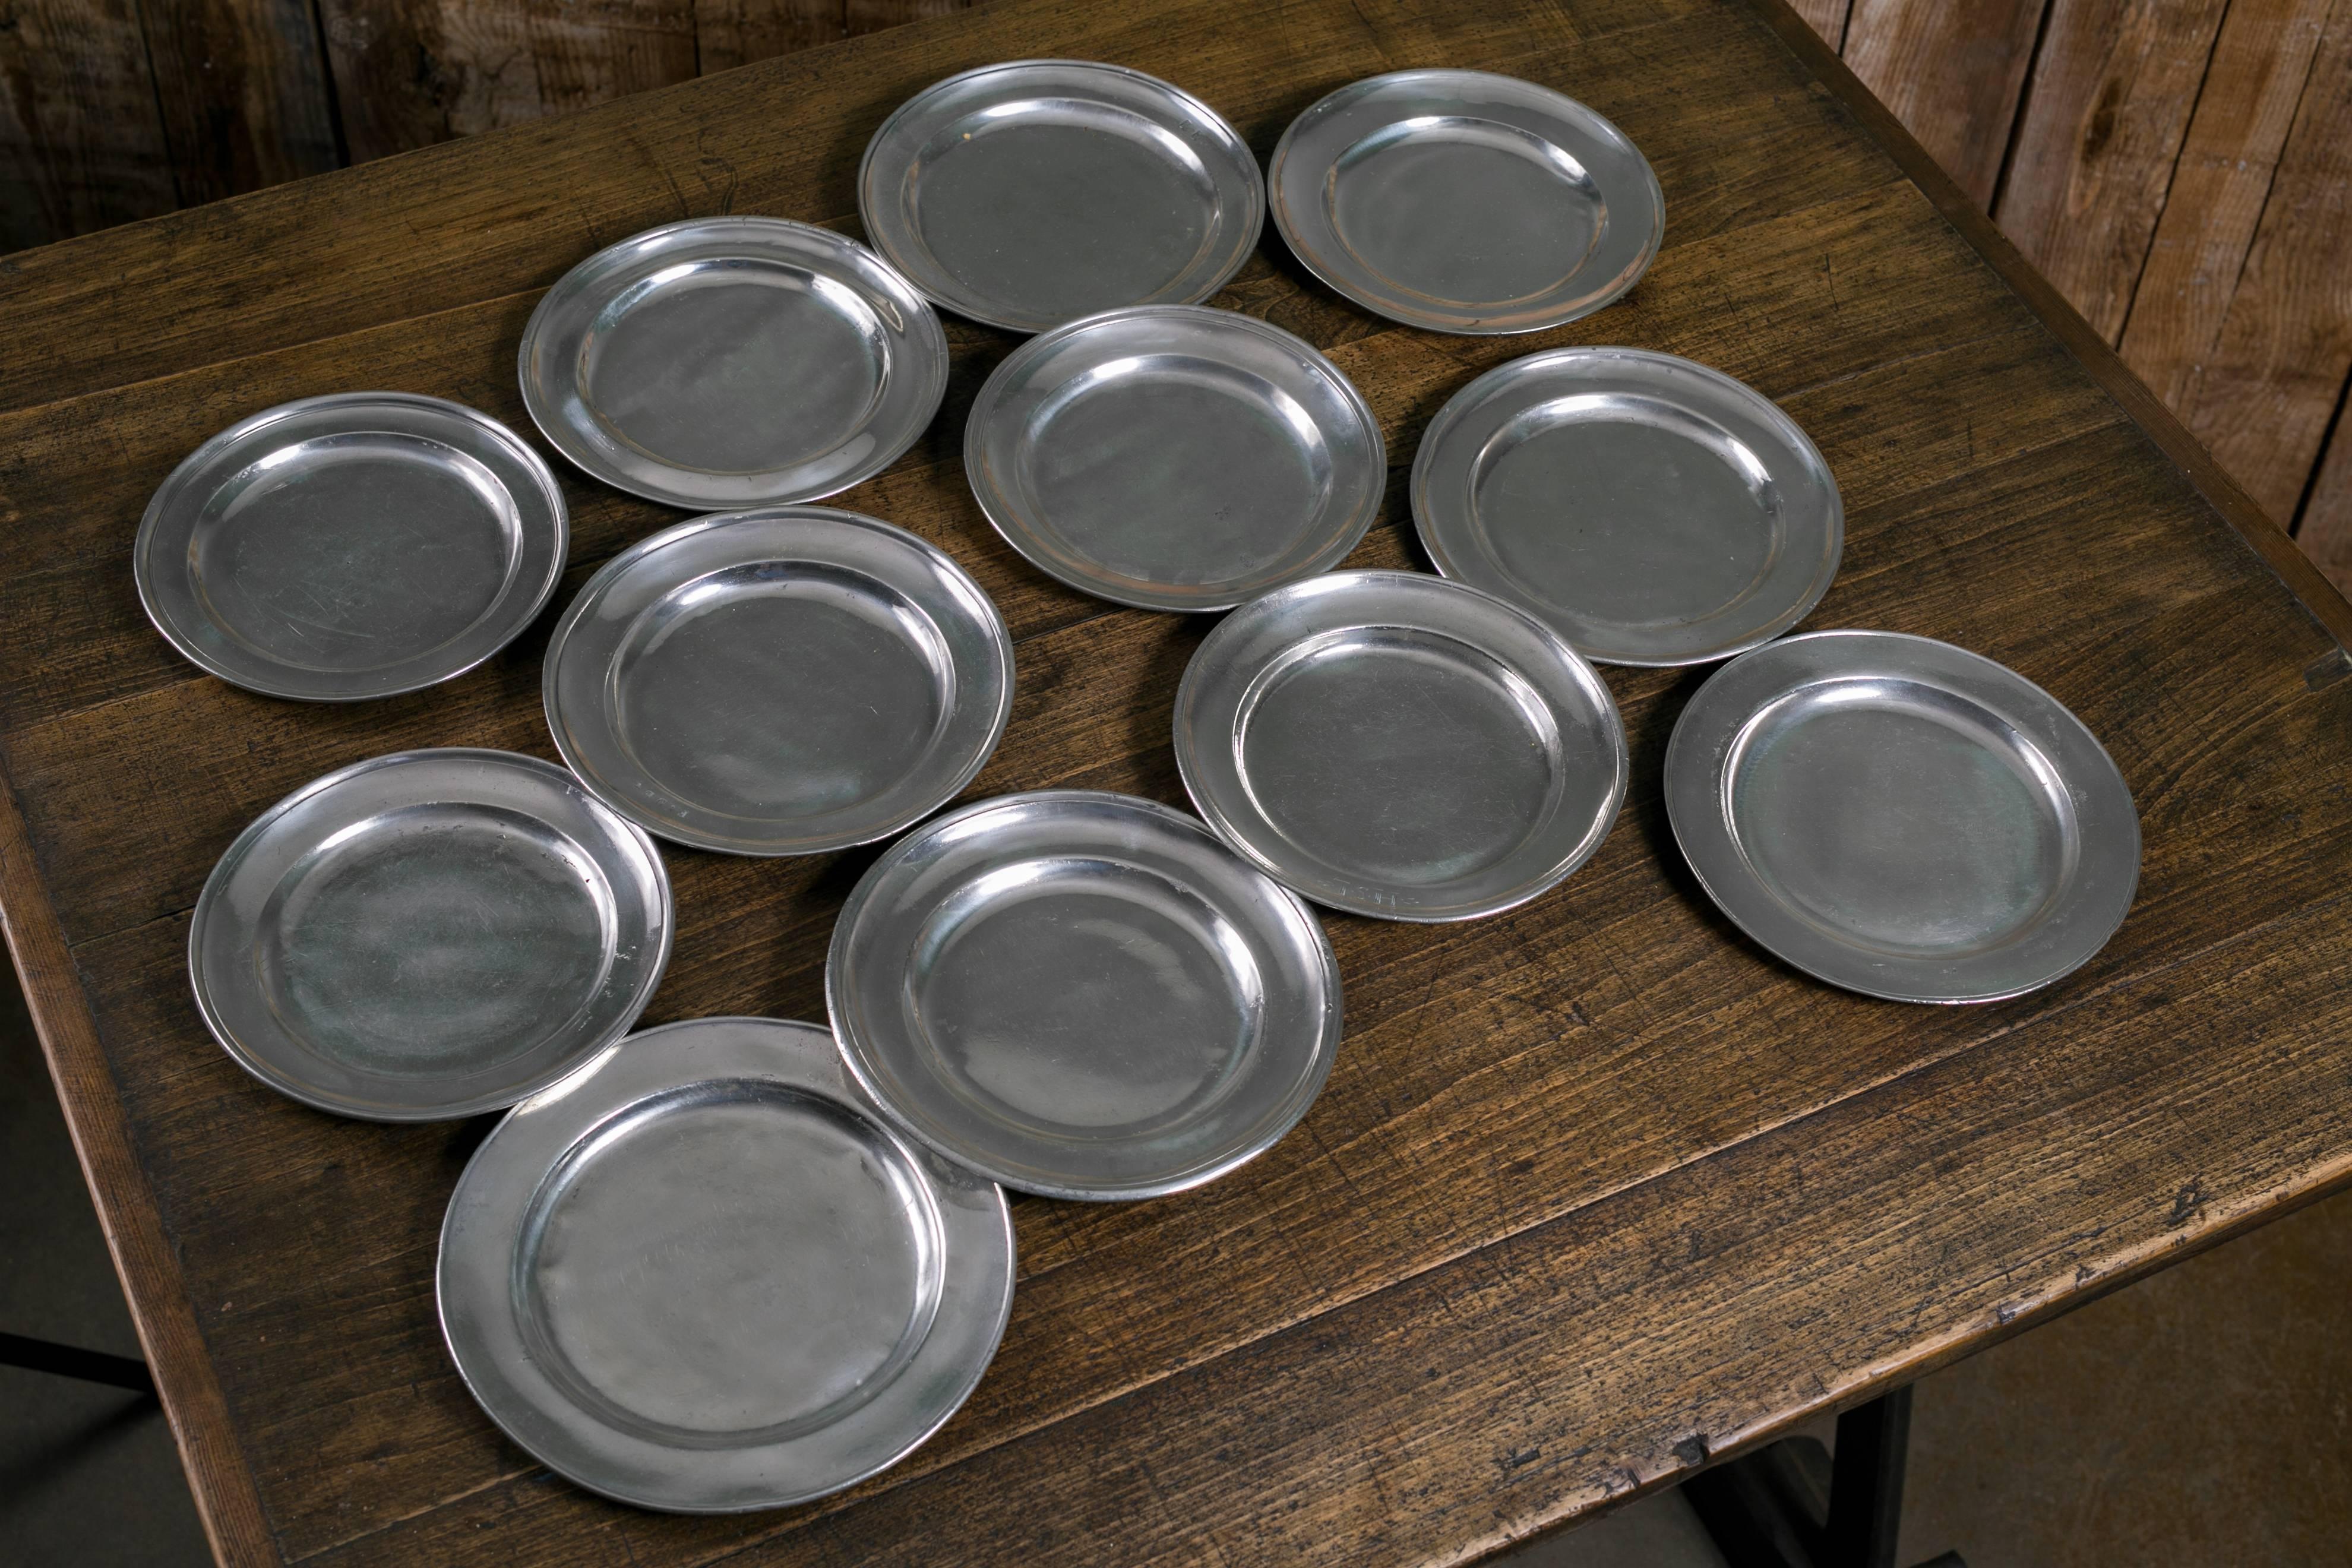 Assorted collection of 12 vintage pewter plates from Belgium. Beautiful light silver coloring. Some are stamped. Lovely as a wall or hutch display. Price is for the set of 12 plates. Sizes vary slightly.